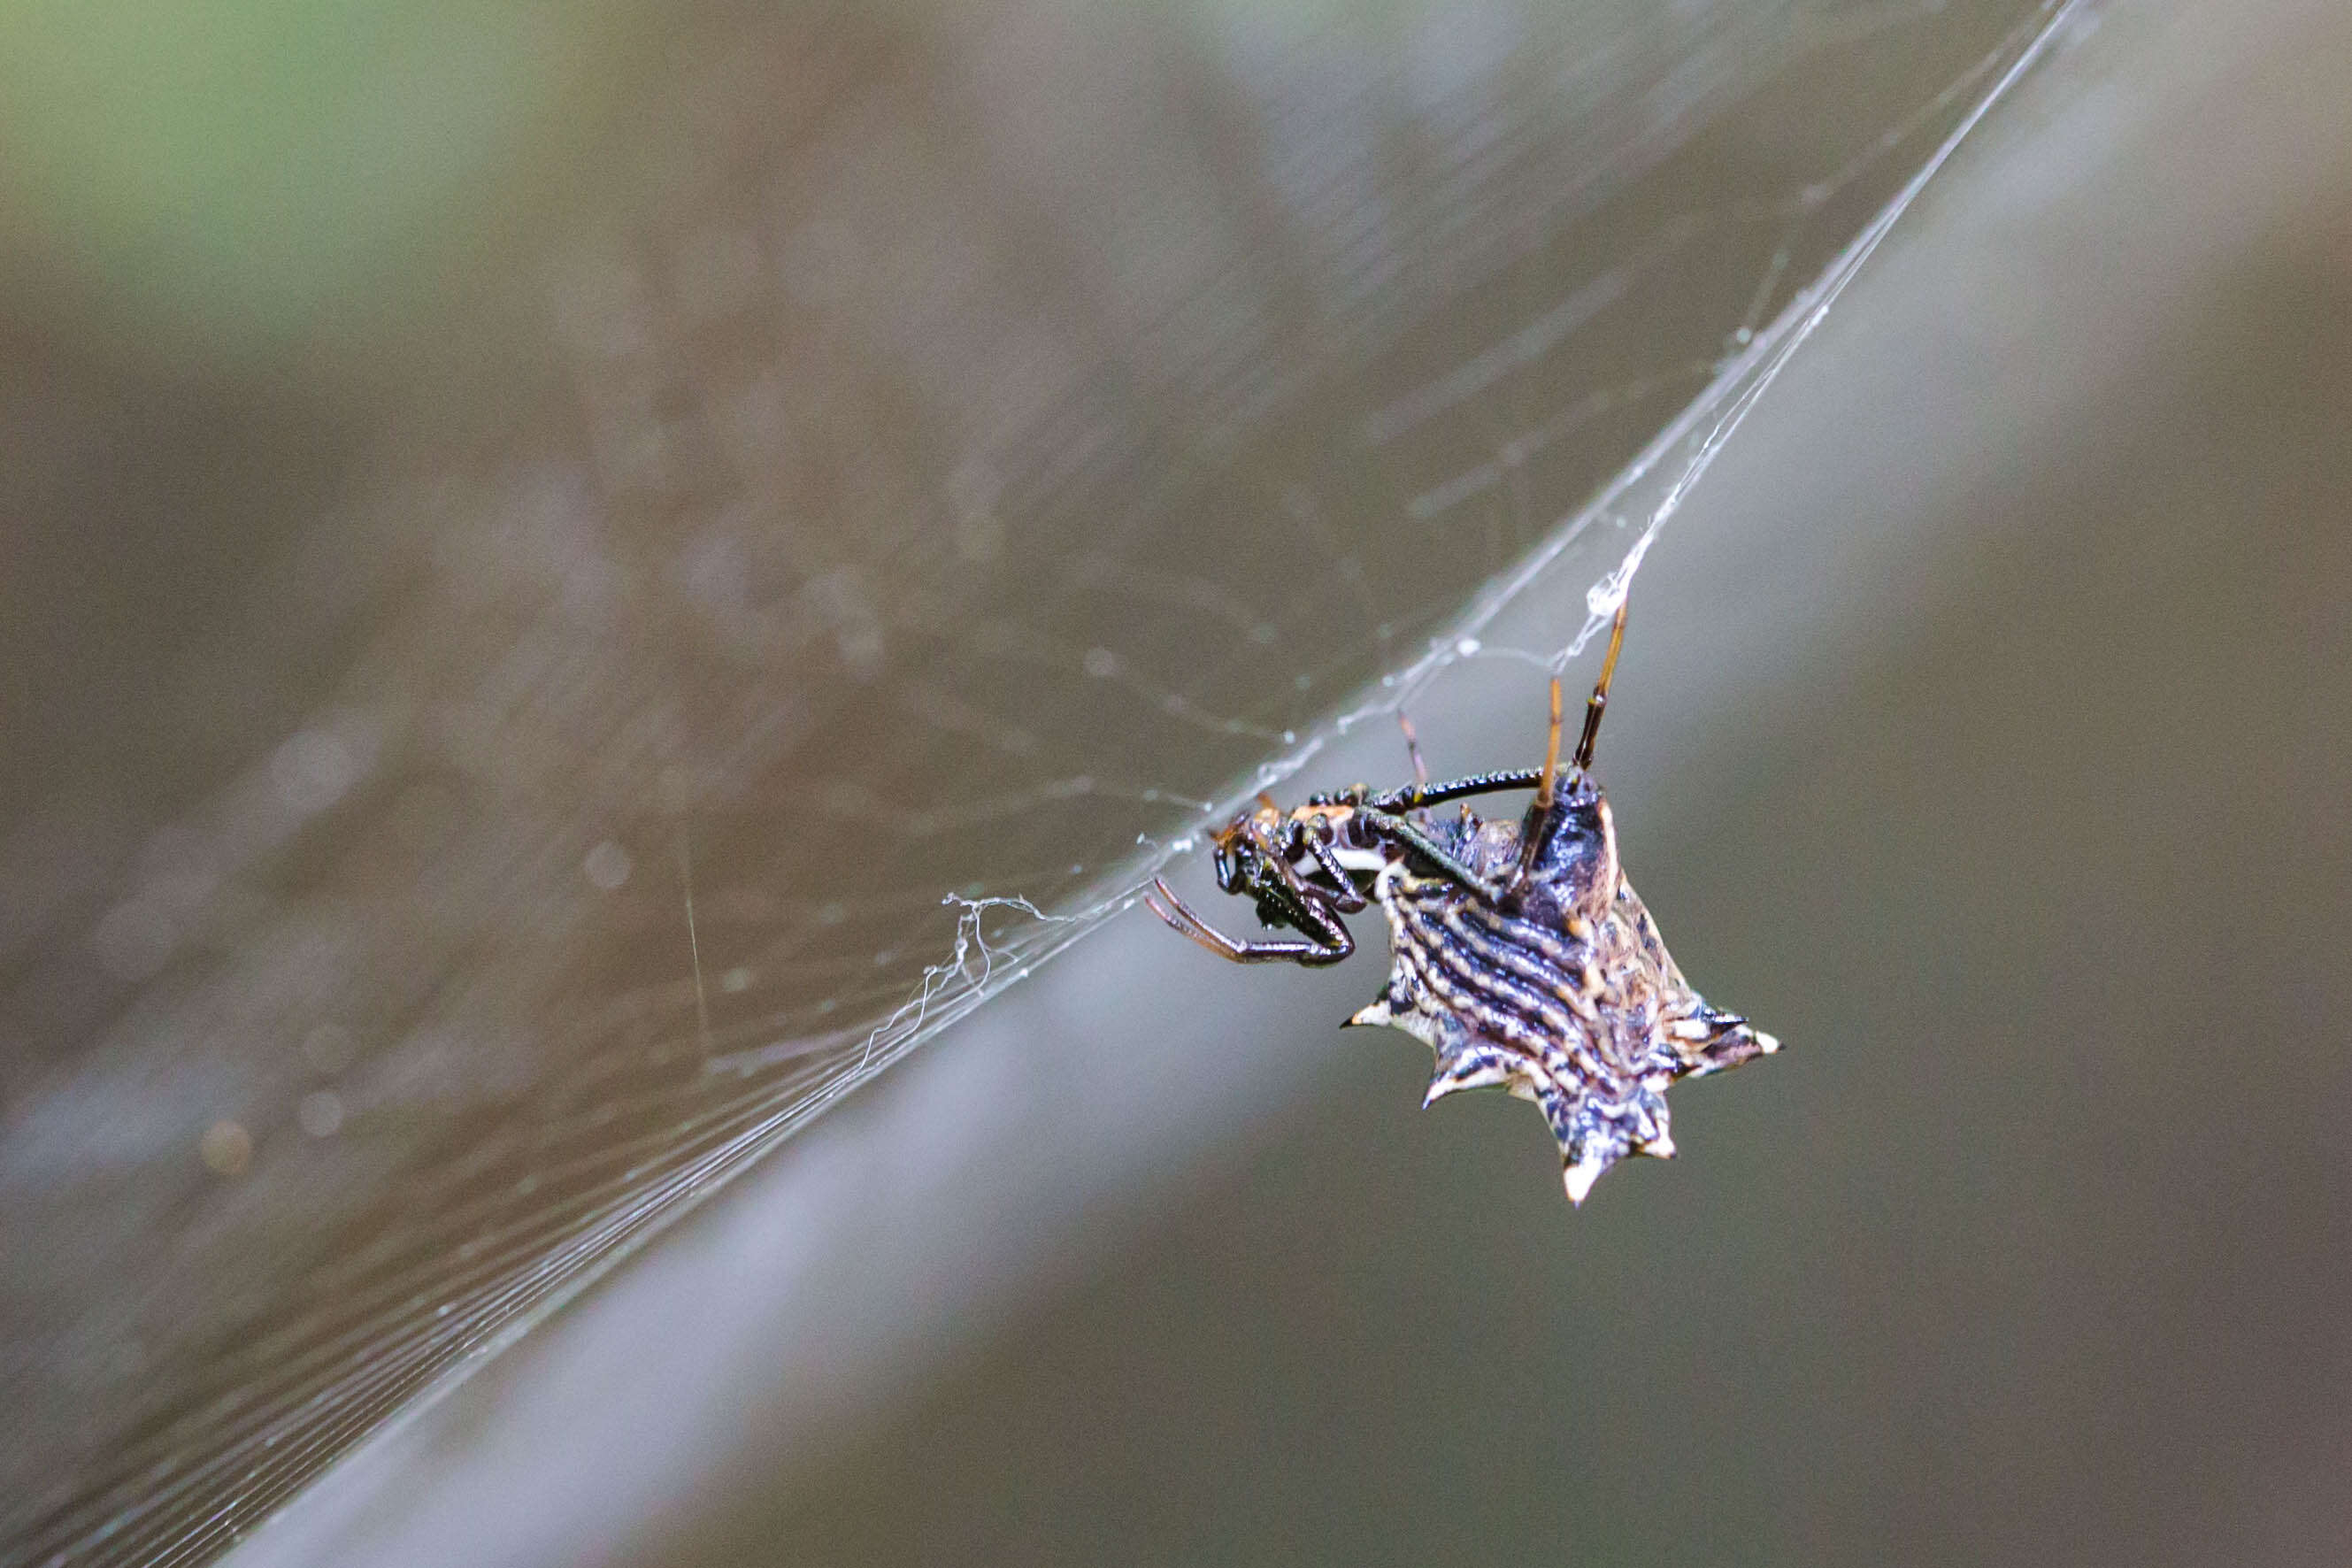 Image of Spined Micrathena